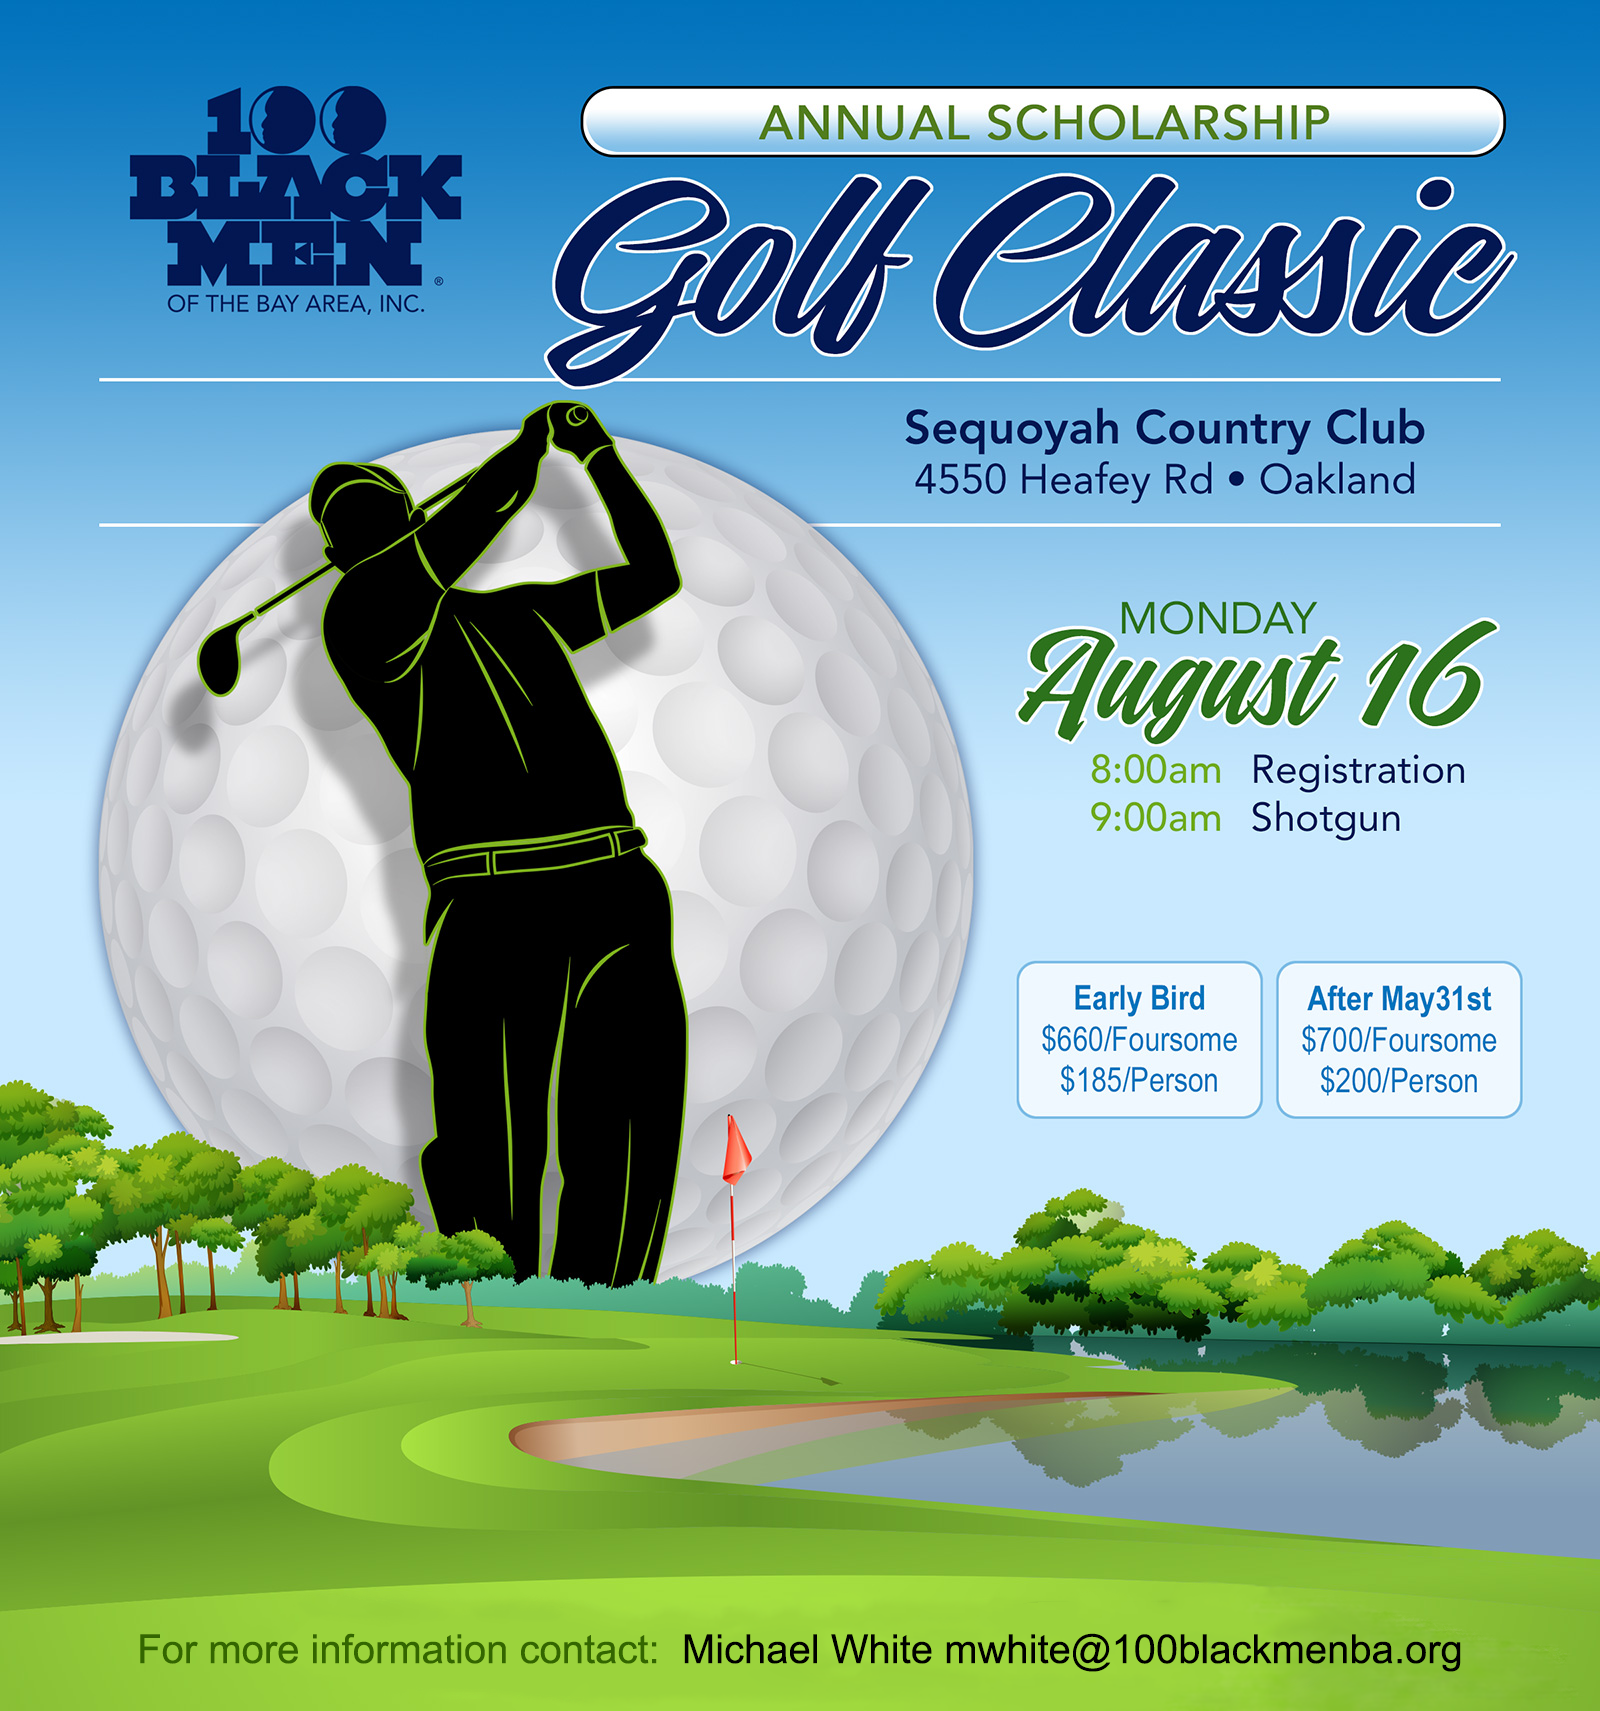 100 Black Men of the Bay Area's Annual Scholarship Golf Classic